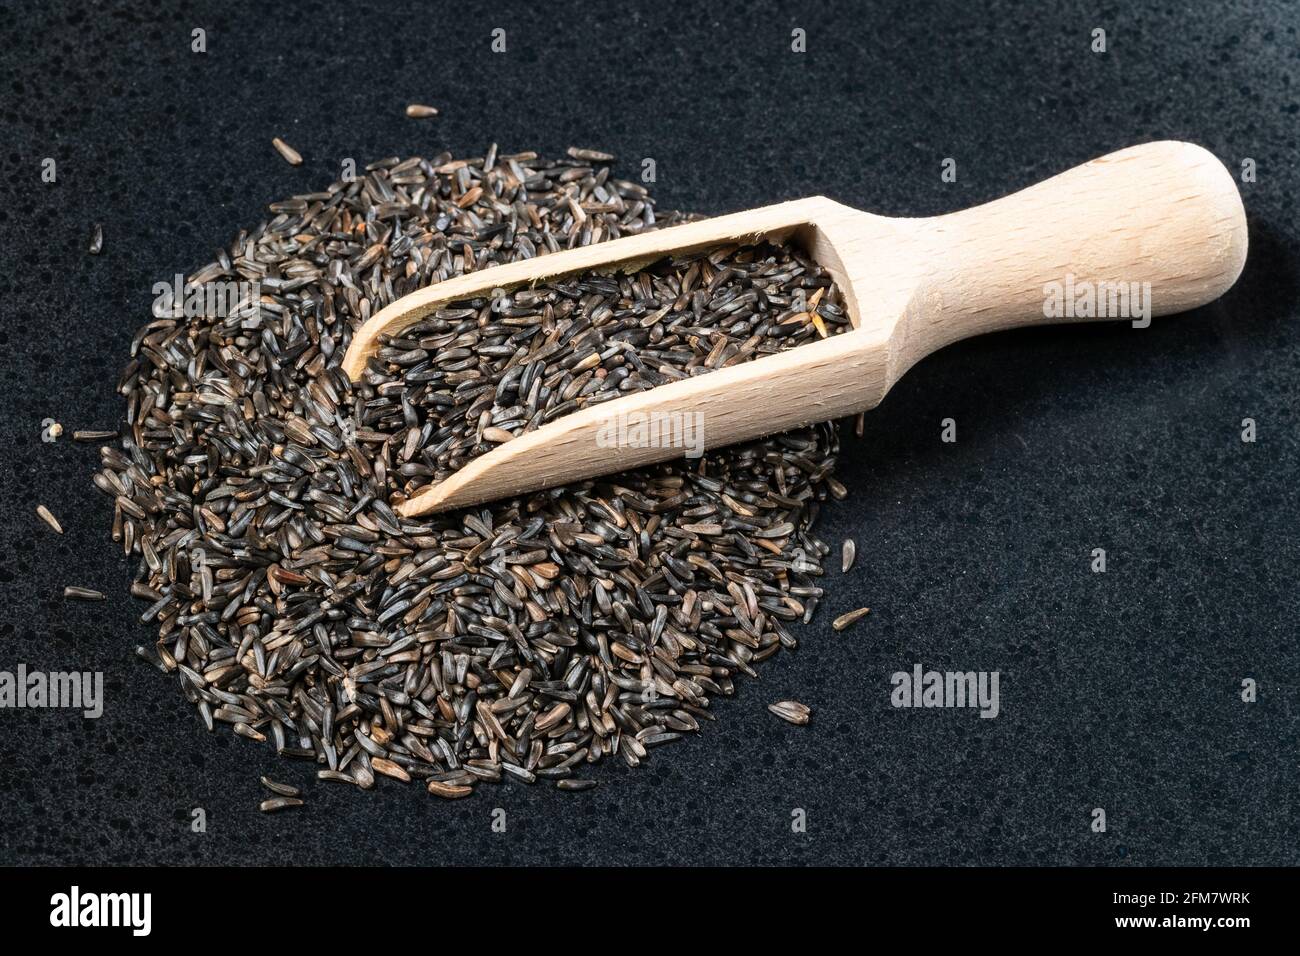 wooden scoop on pile of niger seeds (Guizotia Abyssinica) on black plate Stock Photo